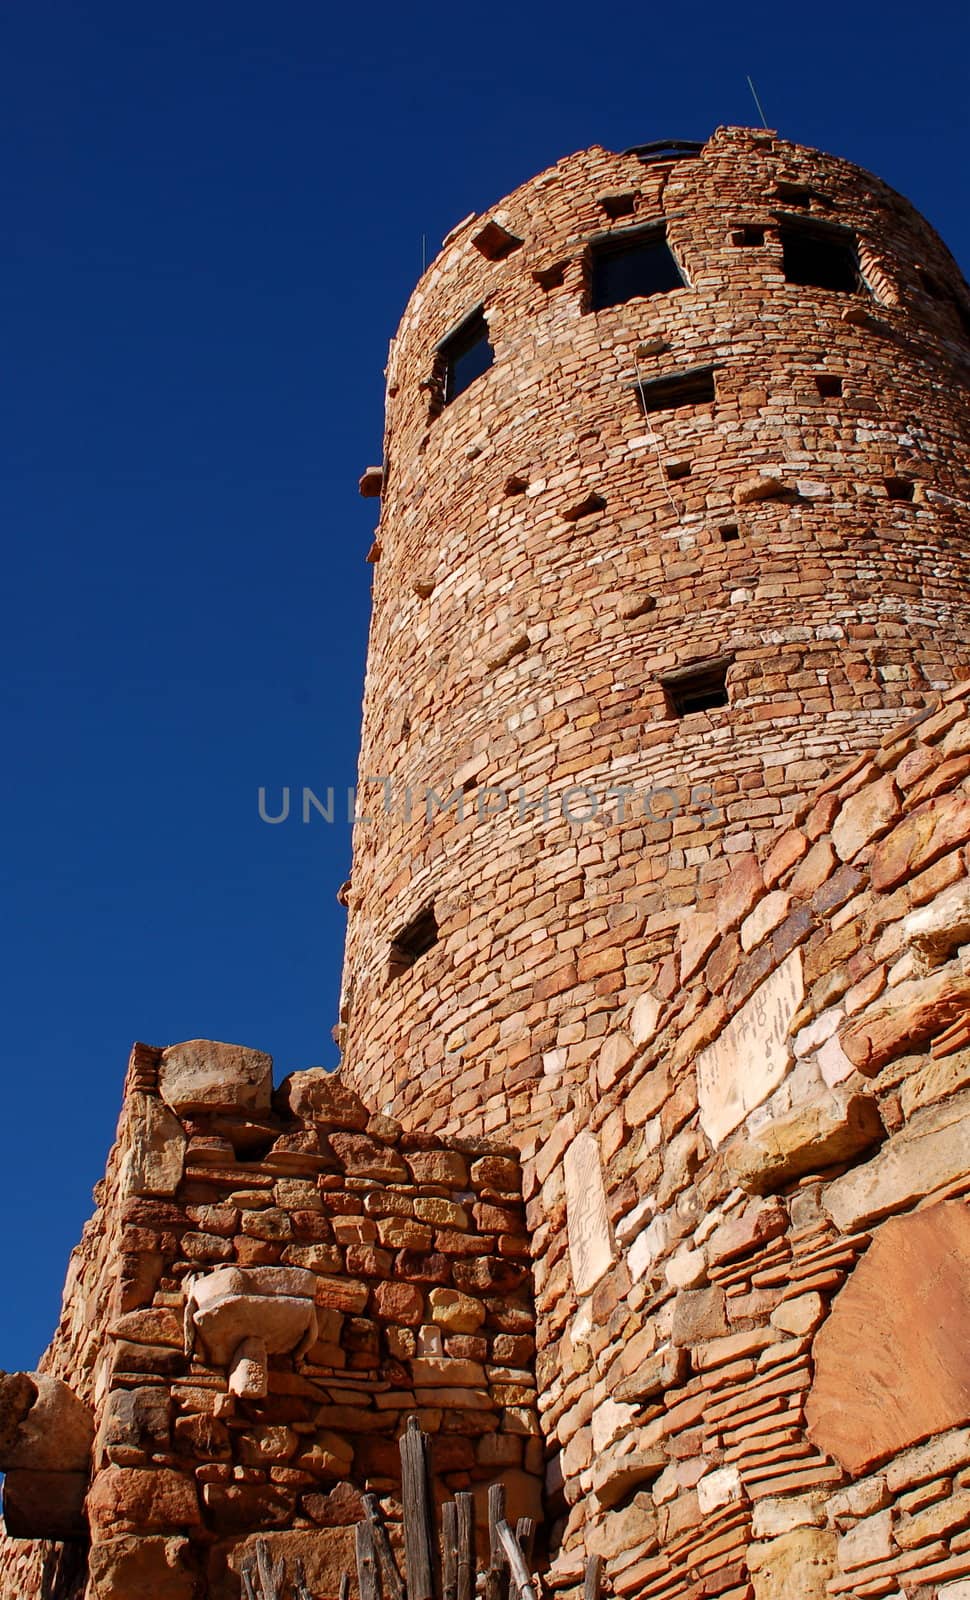 Desert Tower at the Grand Canyon, Arizona, showing a vertical shot up the rustic structure towards the deep blue sky